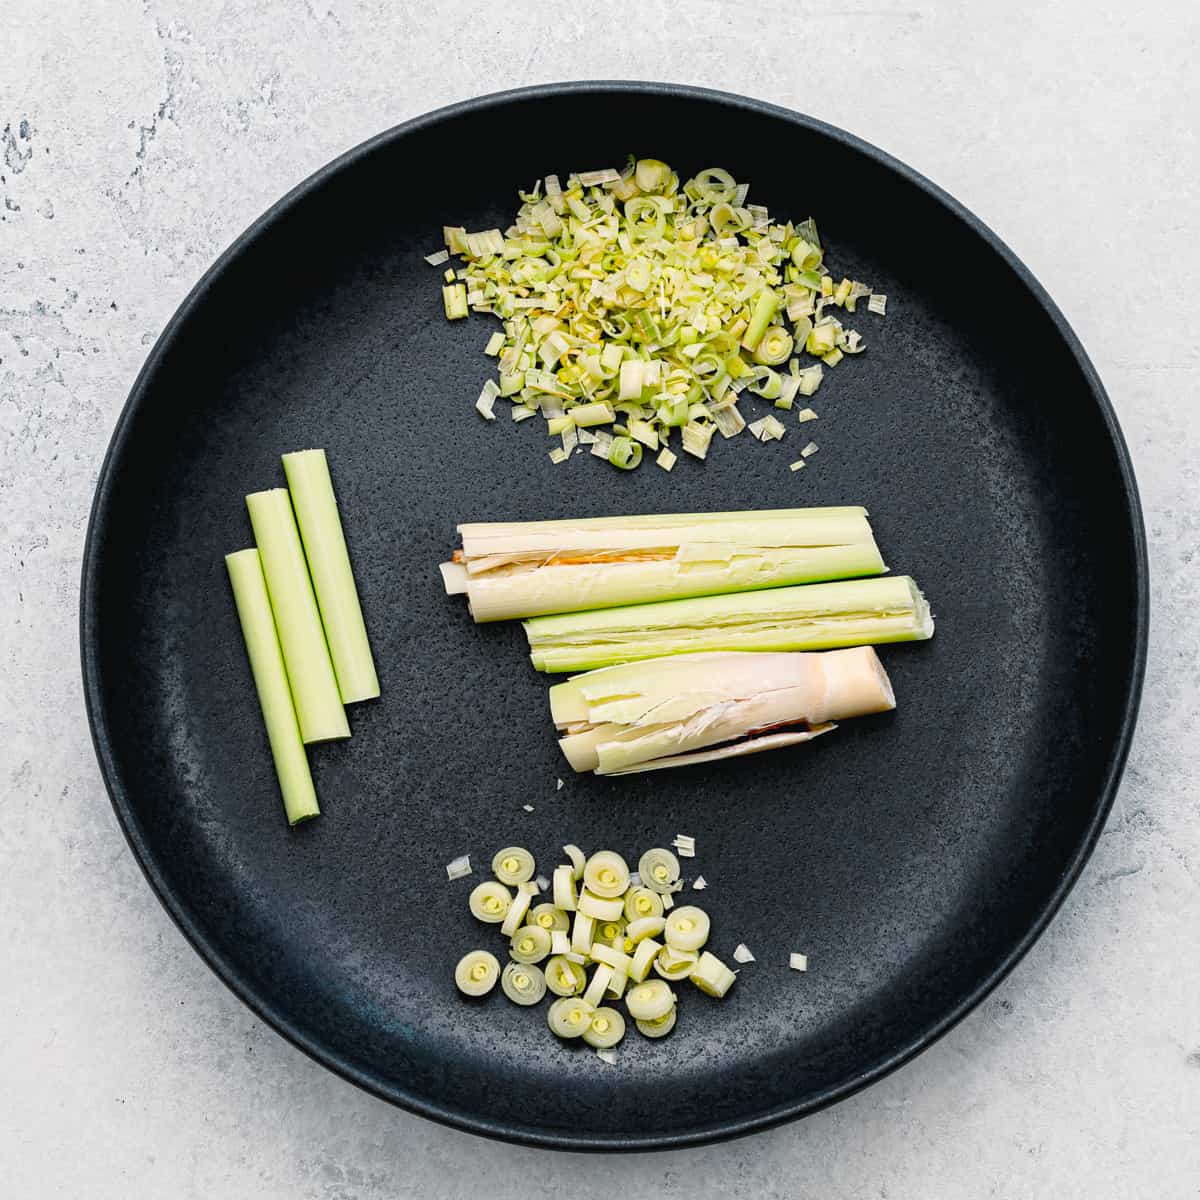 How to Cook with Lemongrass